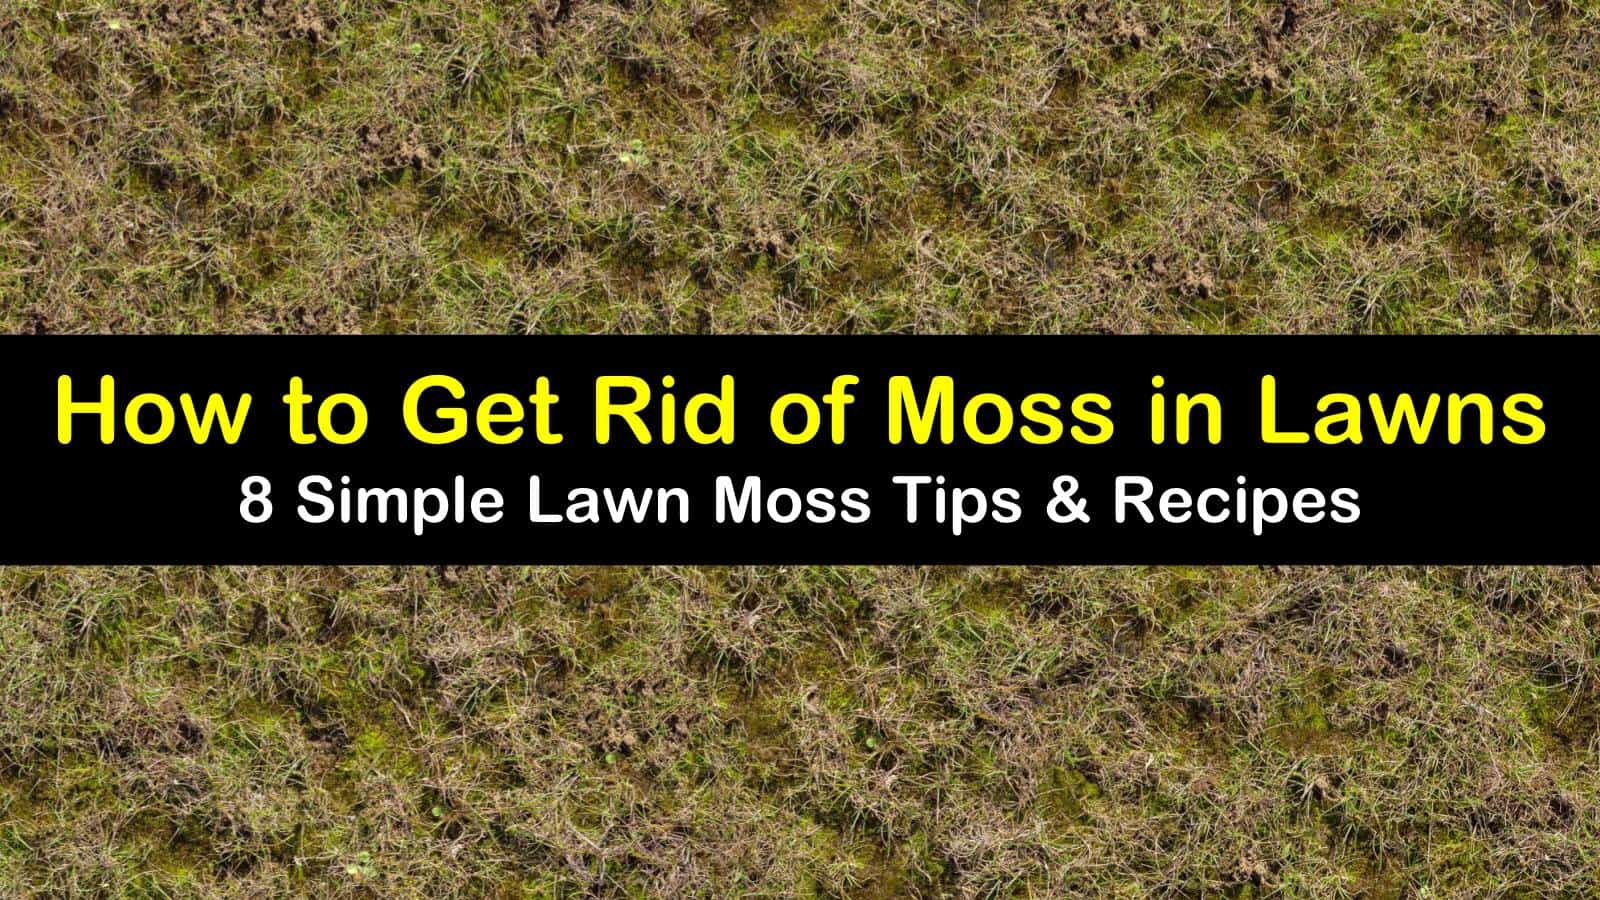 how to get rid of moss in lawns titleimg1